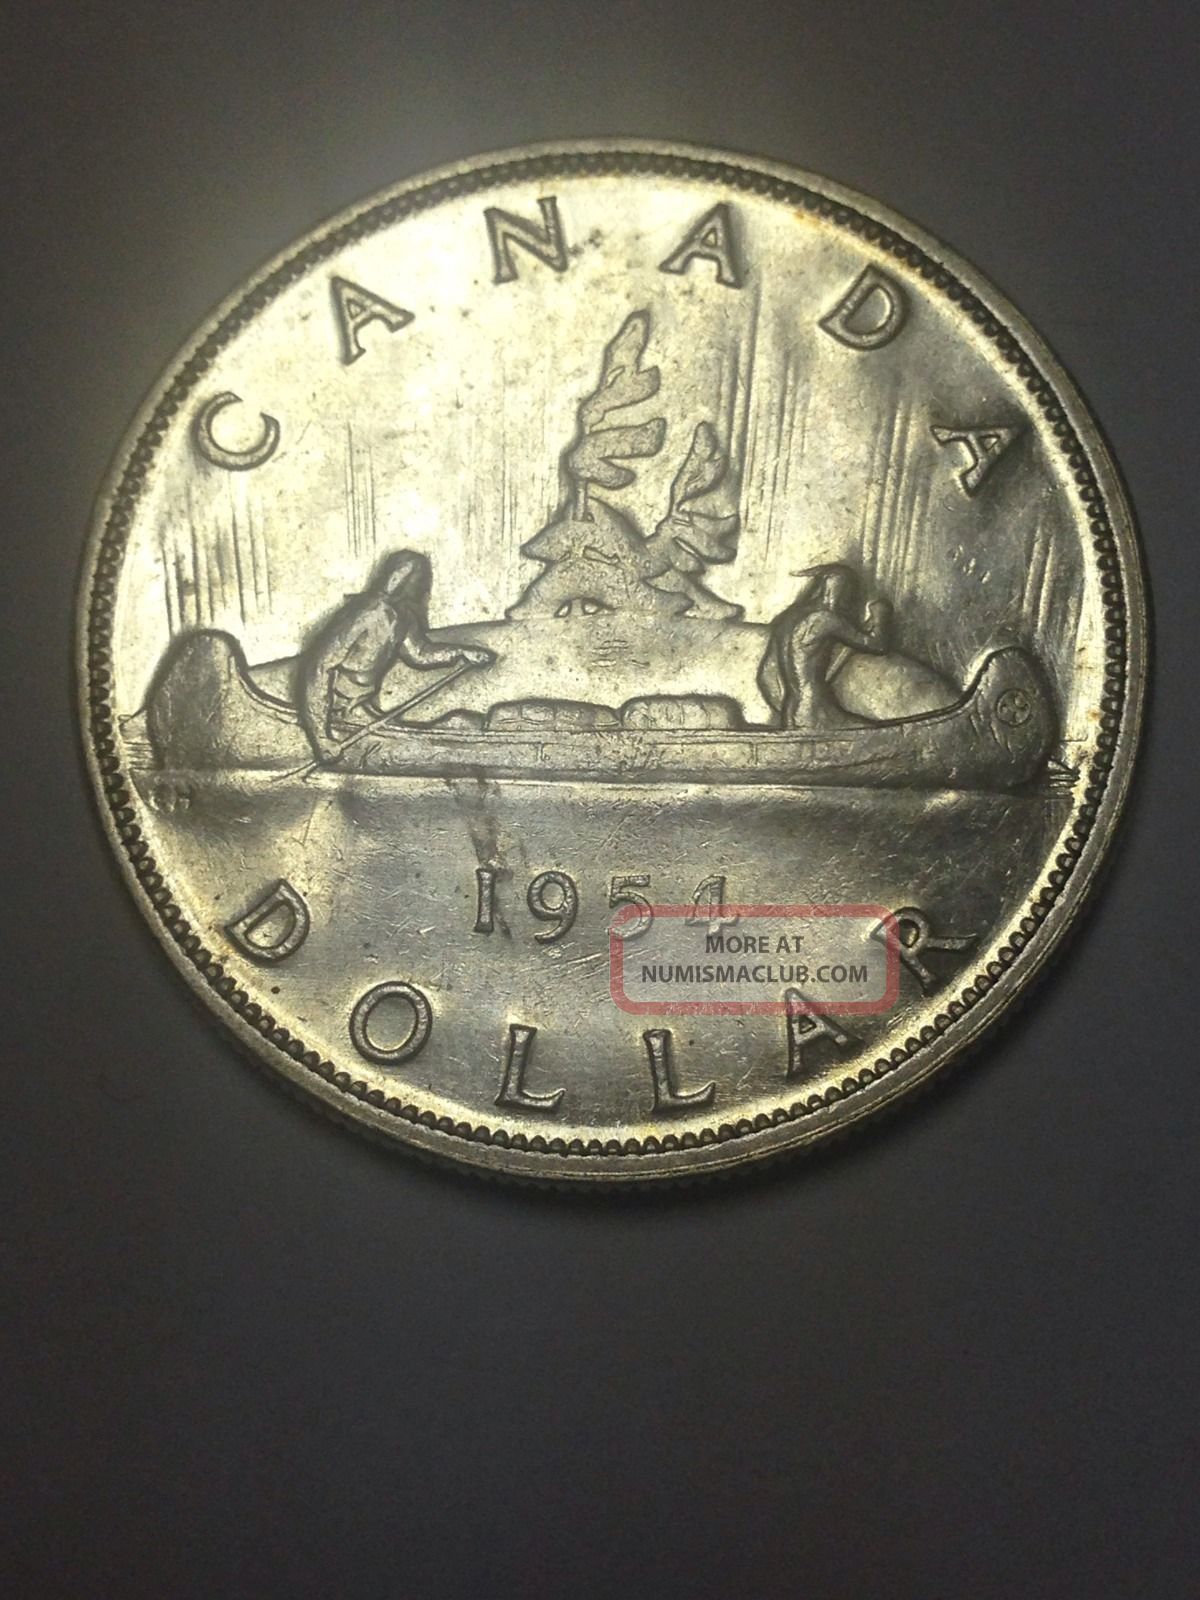 Uncirculated 1954 Canada One Dollar Silver Foreign.